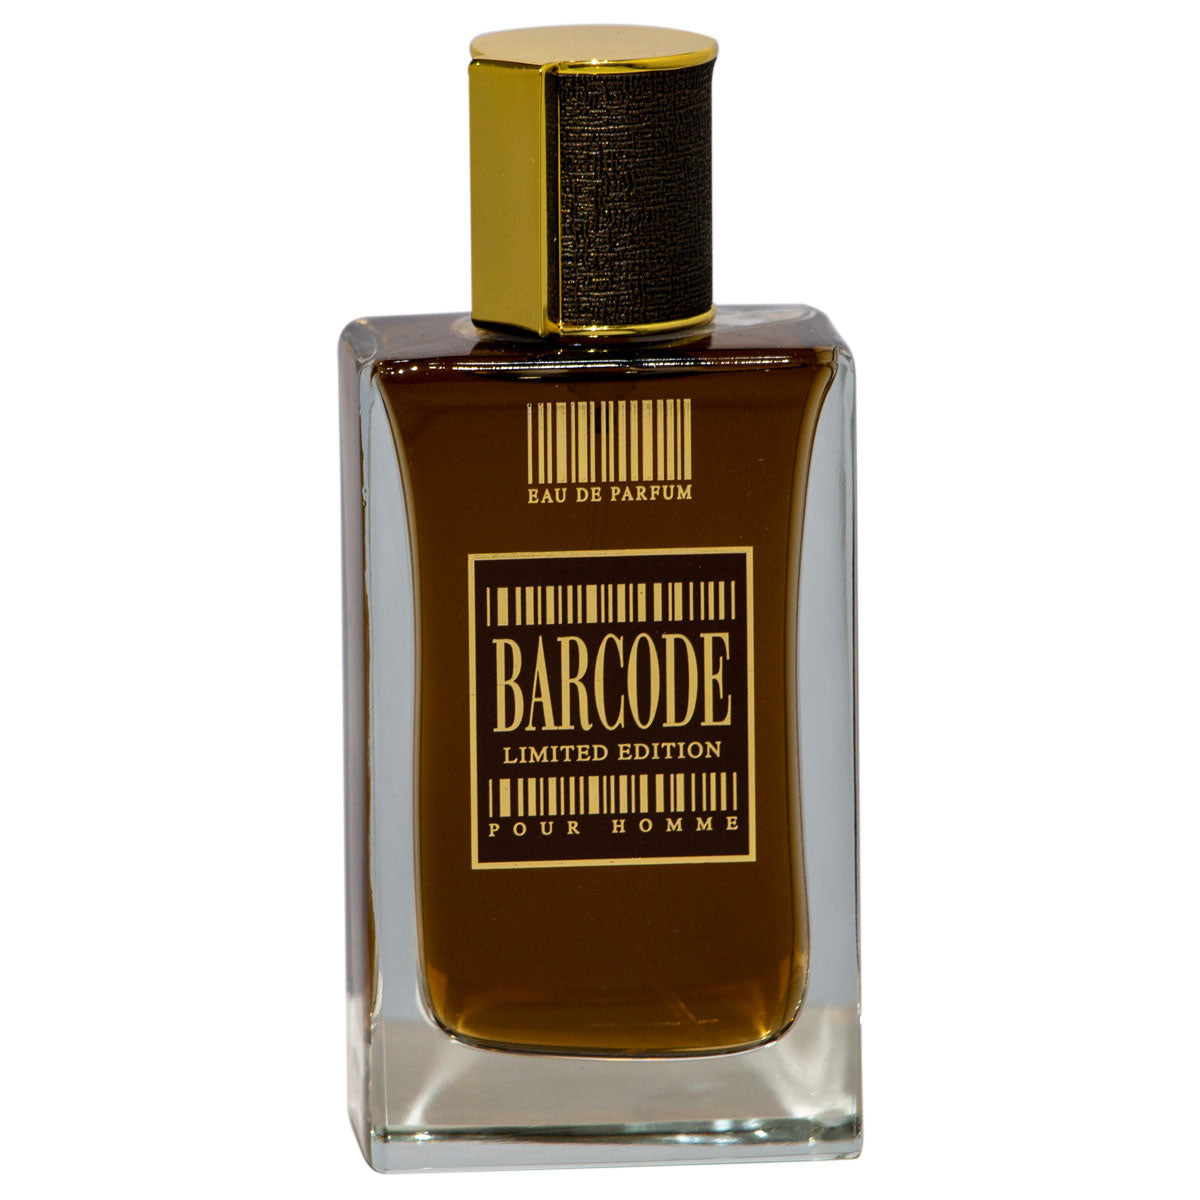 Barcode Limited Edition Pour Homme (Brown) for Men EDP 80ml - samawa perfumes 